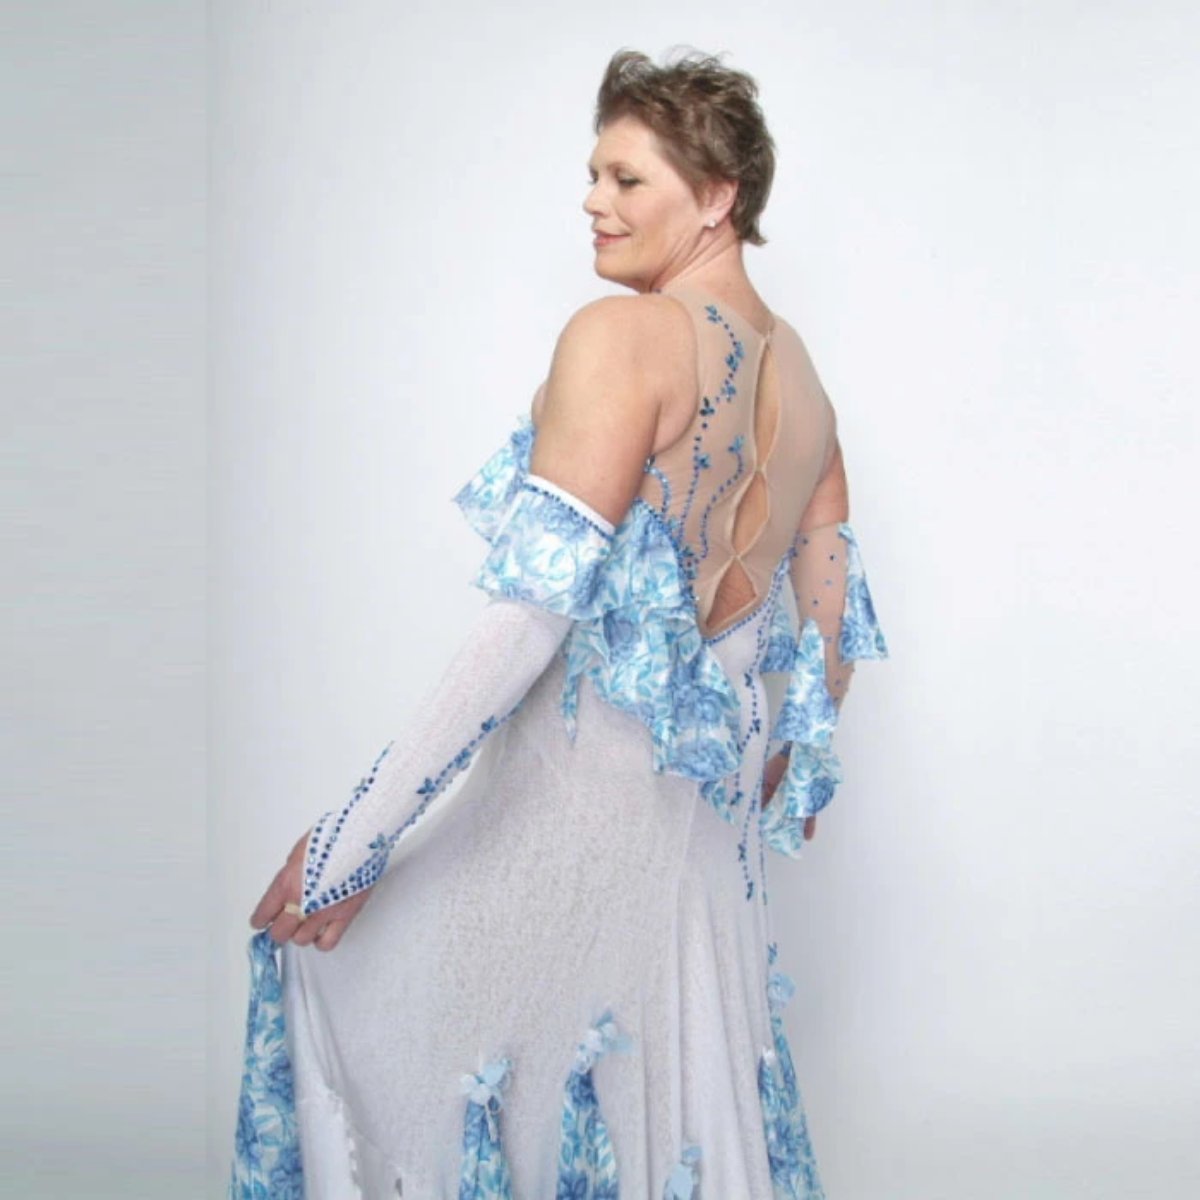 left upper side view of White ballroom dress with blue accents was created on nude illusion of a soft white knit with flounce accents of sky blue & white floral print satin, embellished with sapphire Swarovski stonework & miniature white silk roses. 